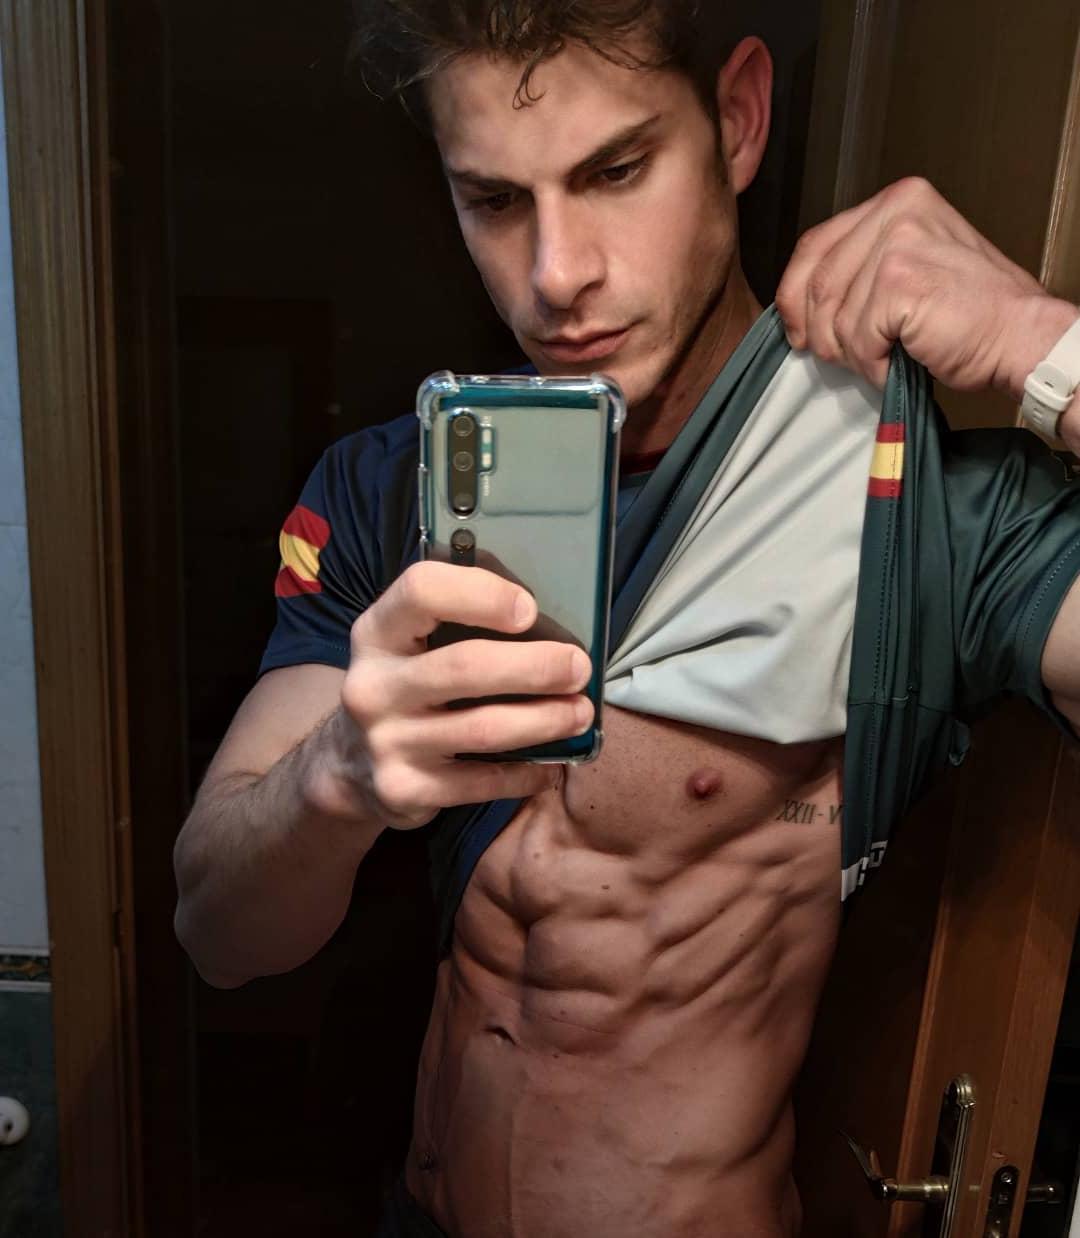 hot-straight-baited-boys-ripped-sixpack-abs-selfie-classic-sexy-american-college-bro